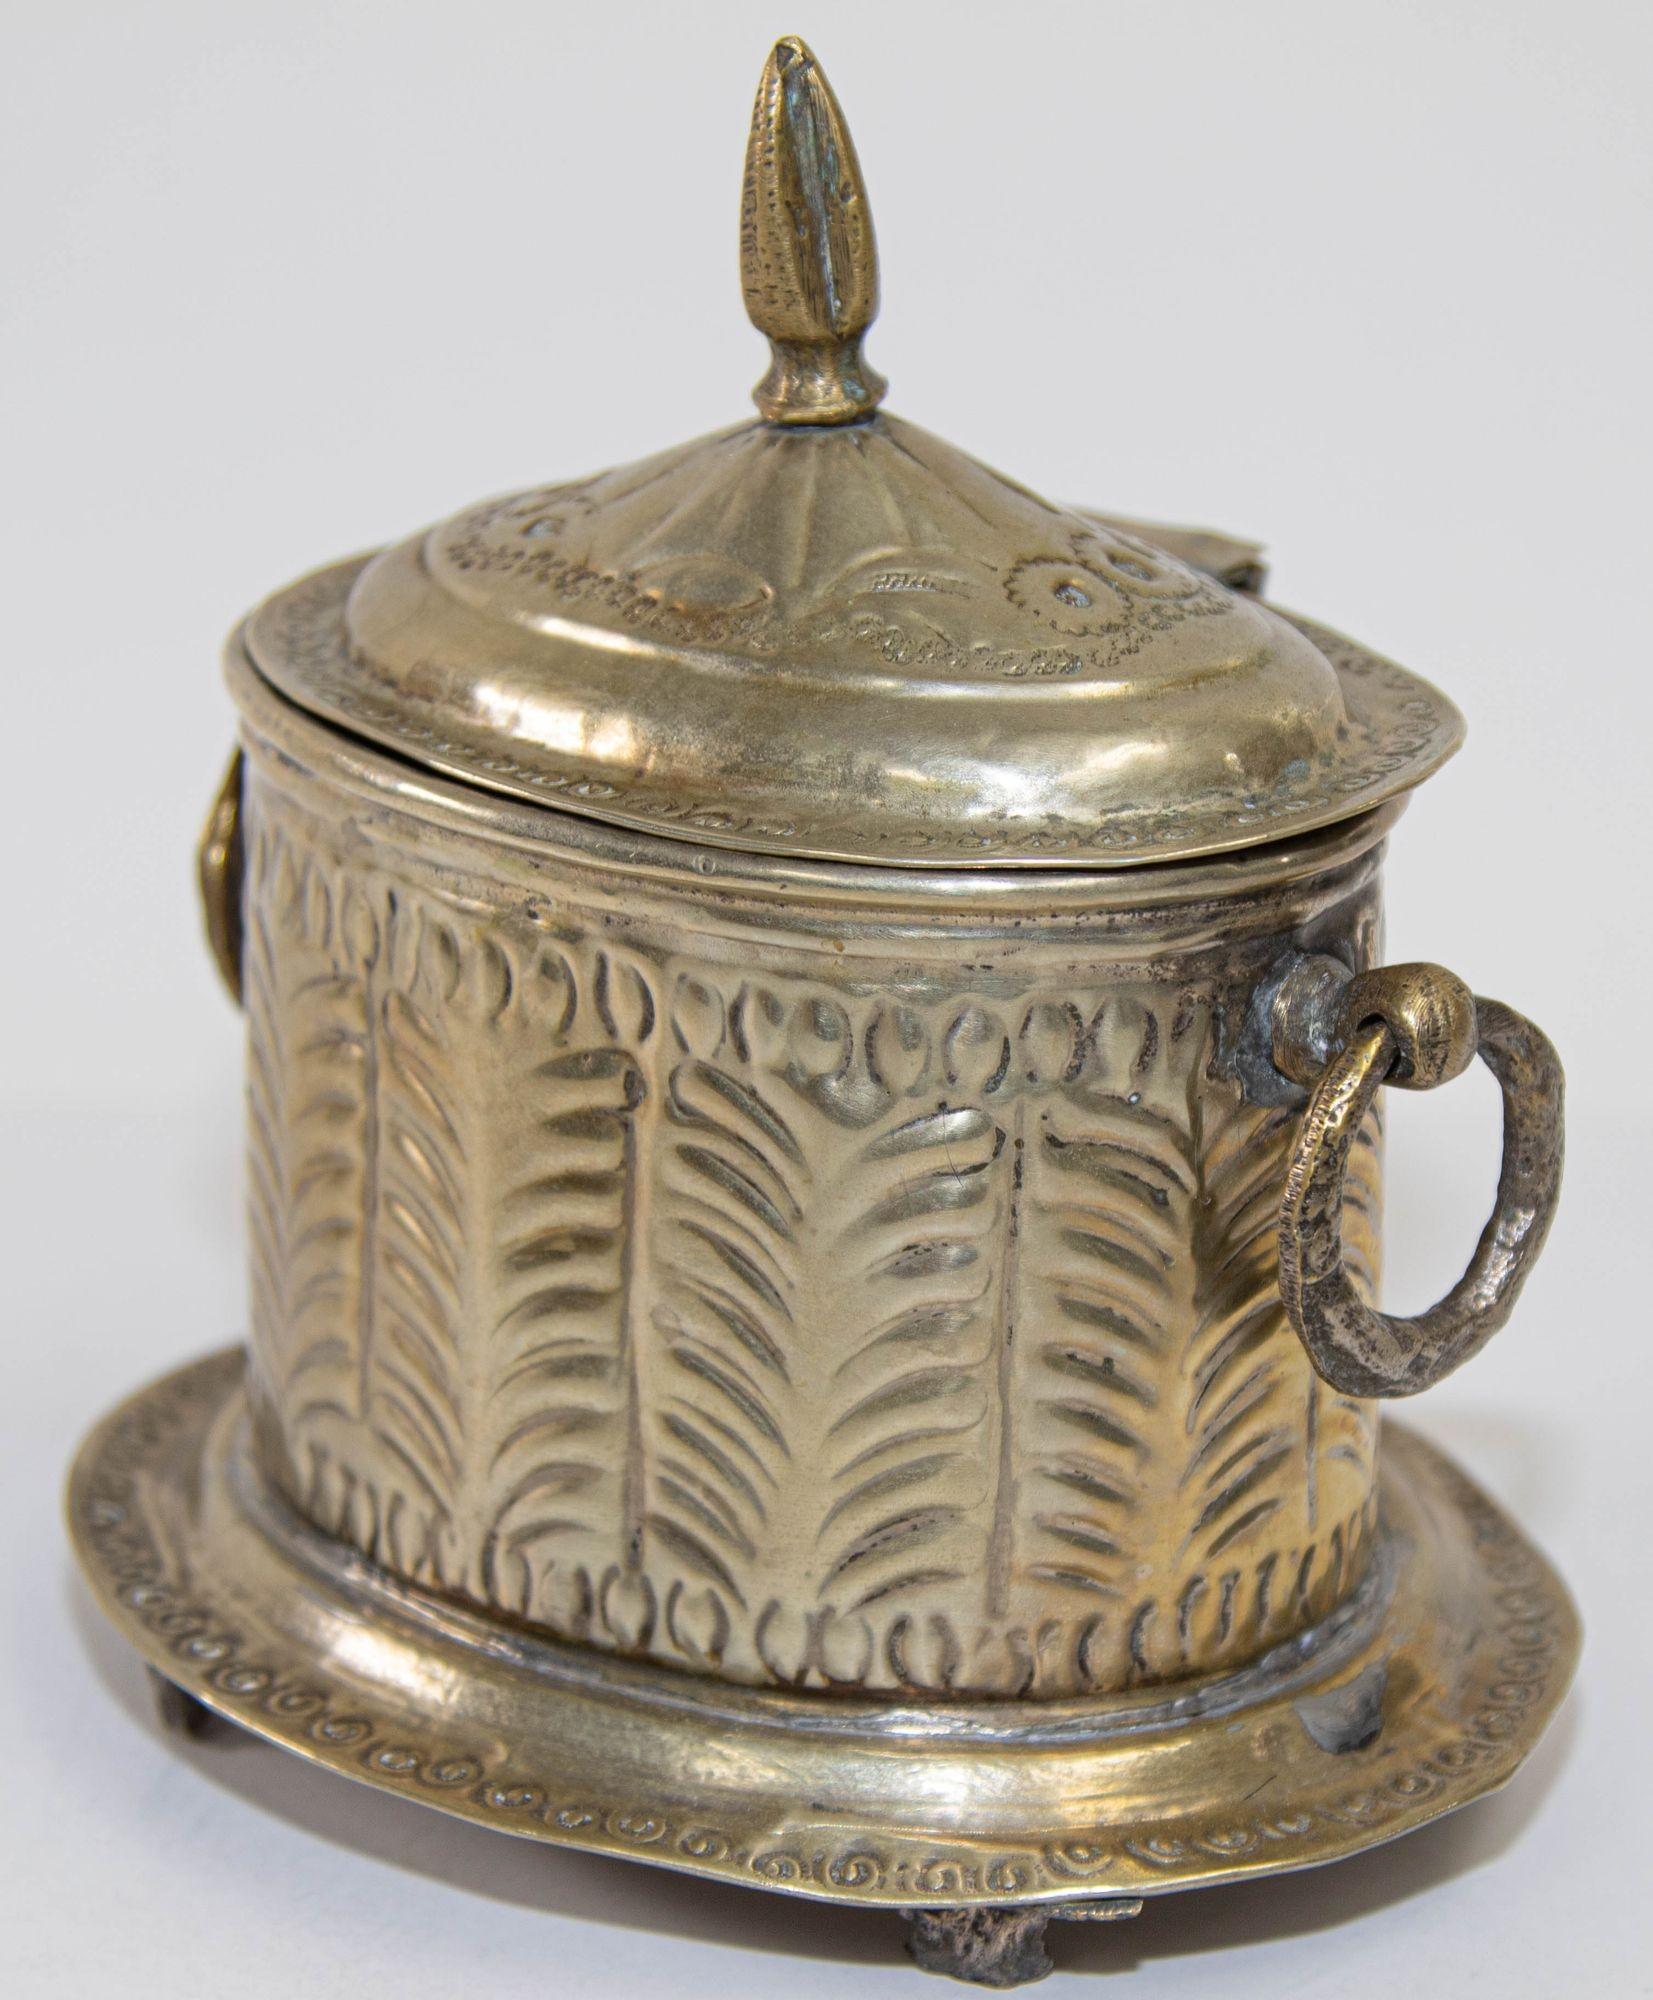 1920s Antique Moroccan Silver Plated Footed Tea Caddy with hinged lid.
This authentic Moroccan brass silver plated box has a beautiful etched geometrical design, beaded trim, and ring handles, perfect for display or for serving.
Beautiful British